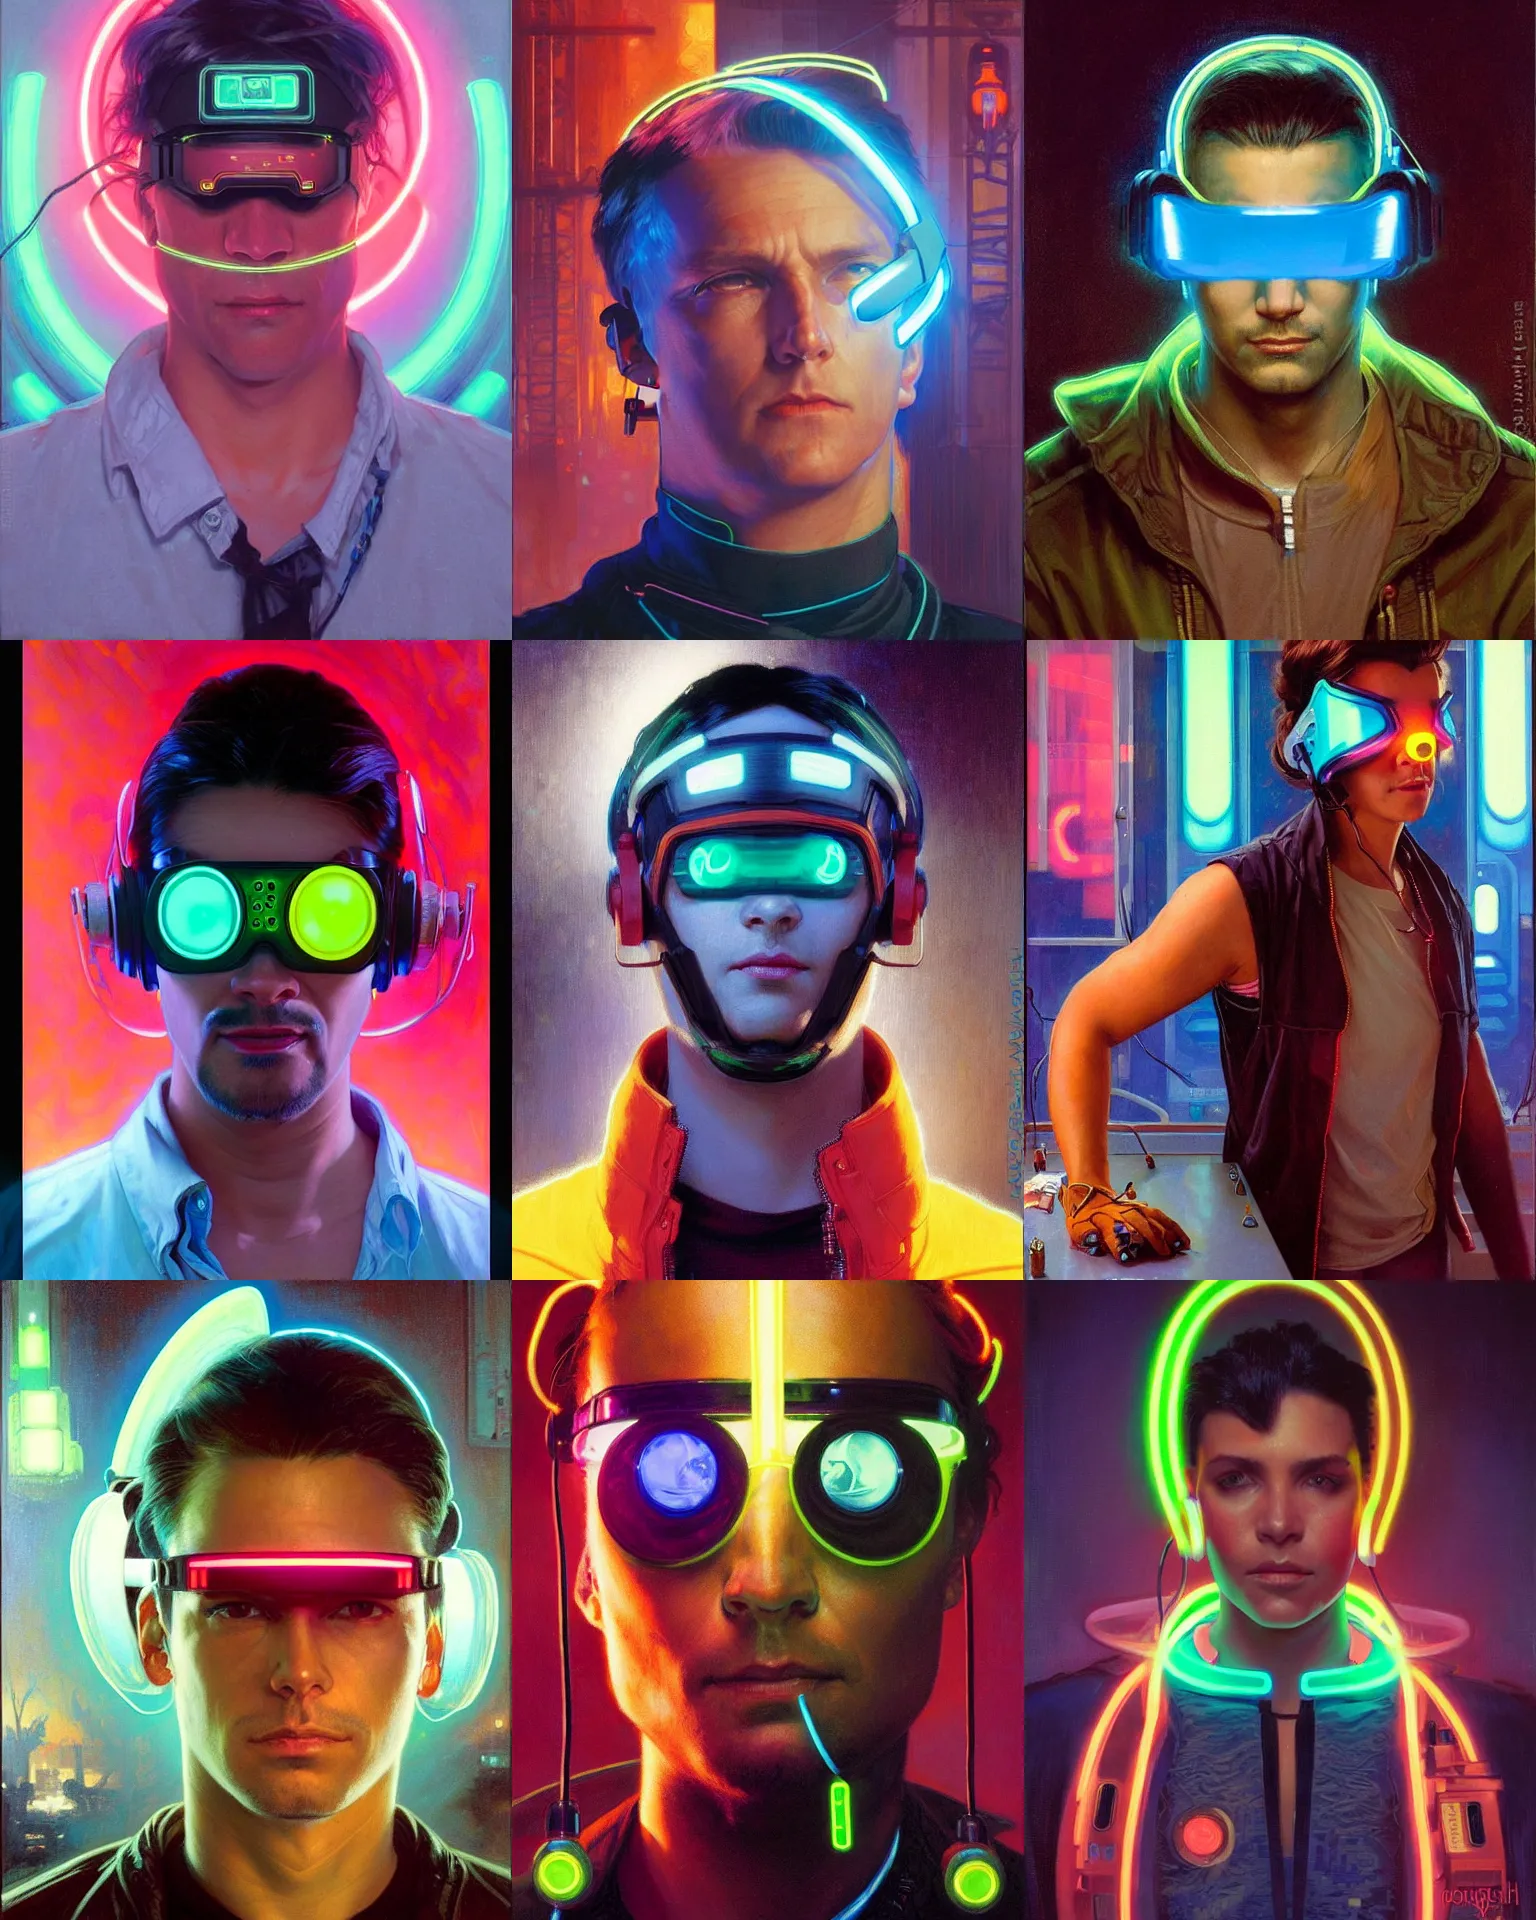 Prompt: neon cyberpunk hacker with glowing geordi visor over eyes and glowing earbuds headshot portrait painting by donato giancola, rhads, loish, alphonse mucha, mead schaeffer fashion photography